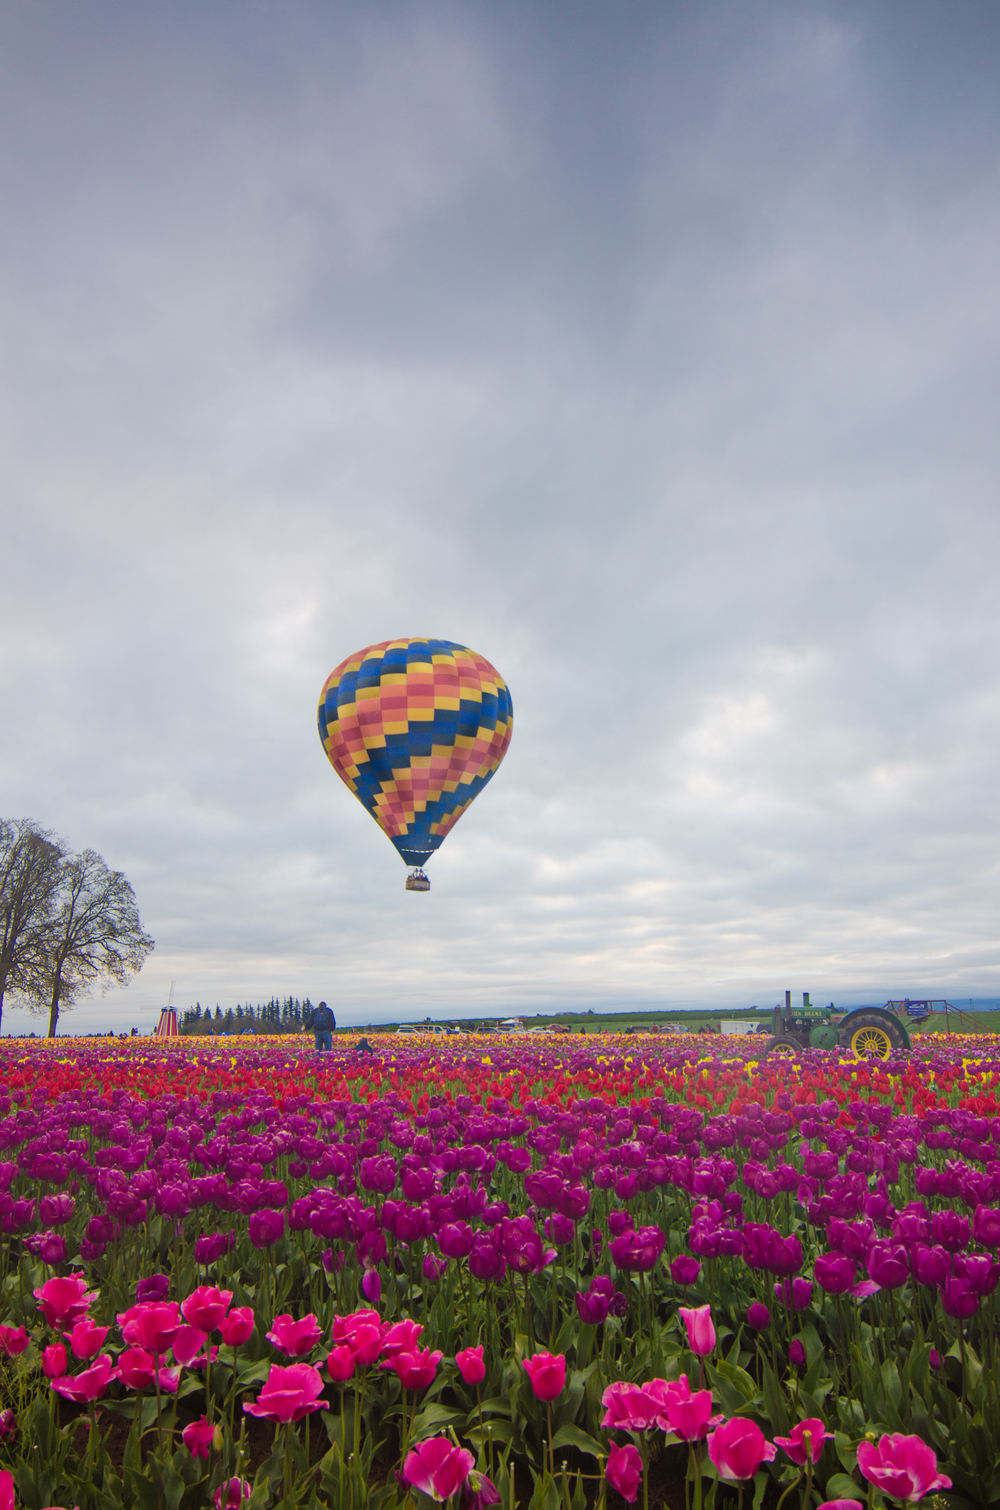  The first and only Hot Air Balloon that successfully launched from the tulip farm. 